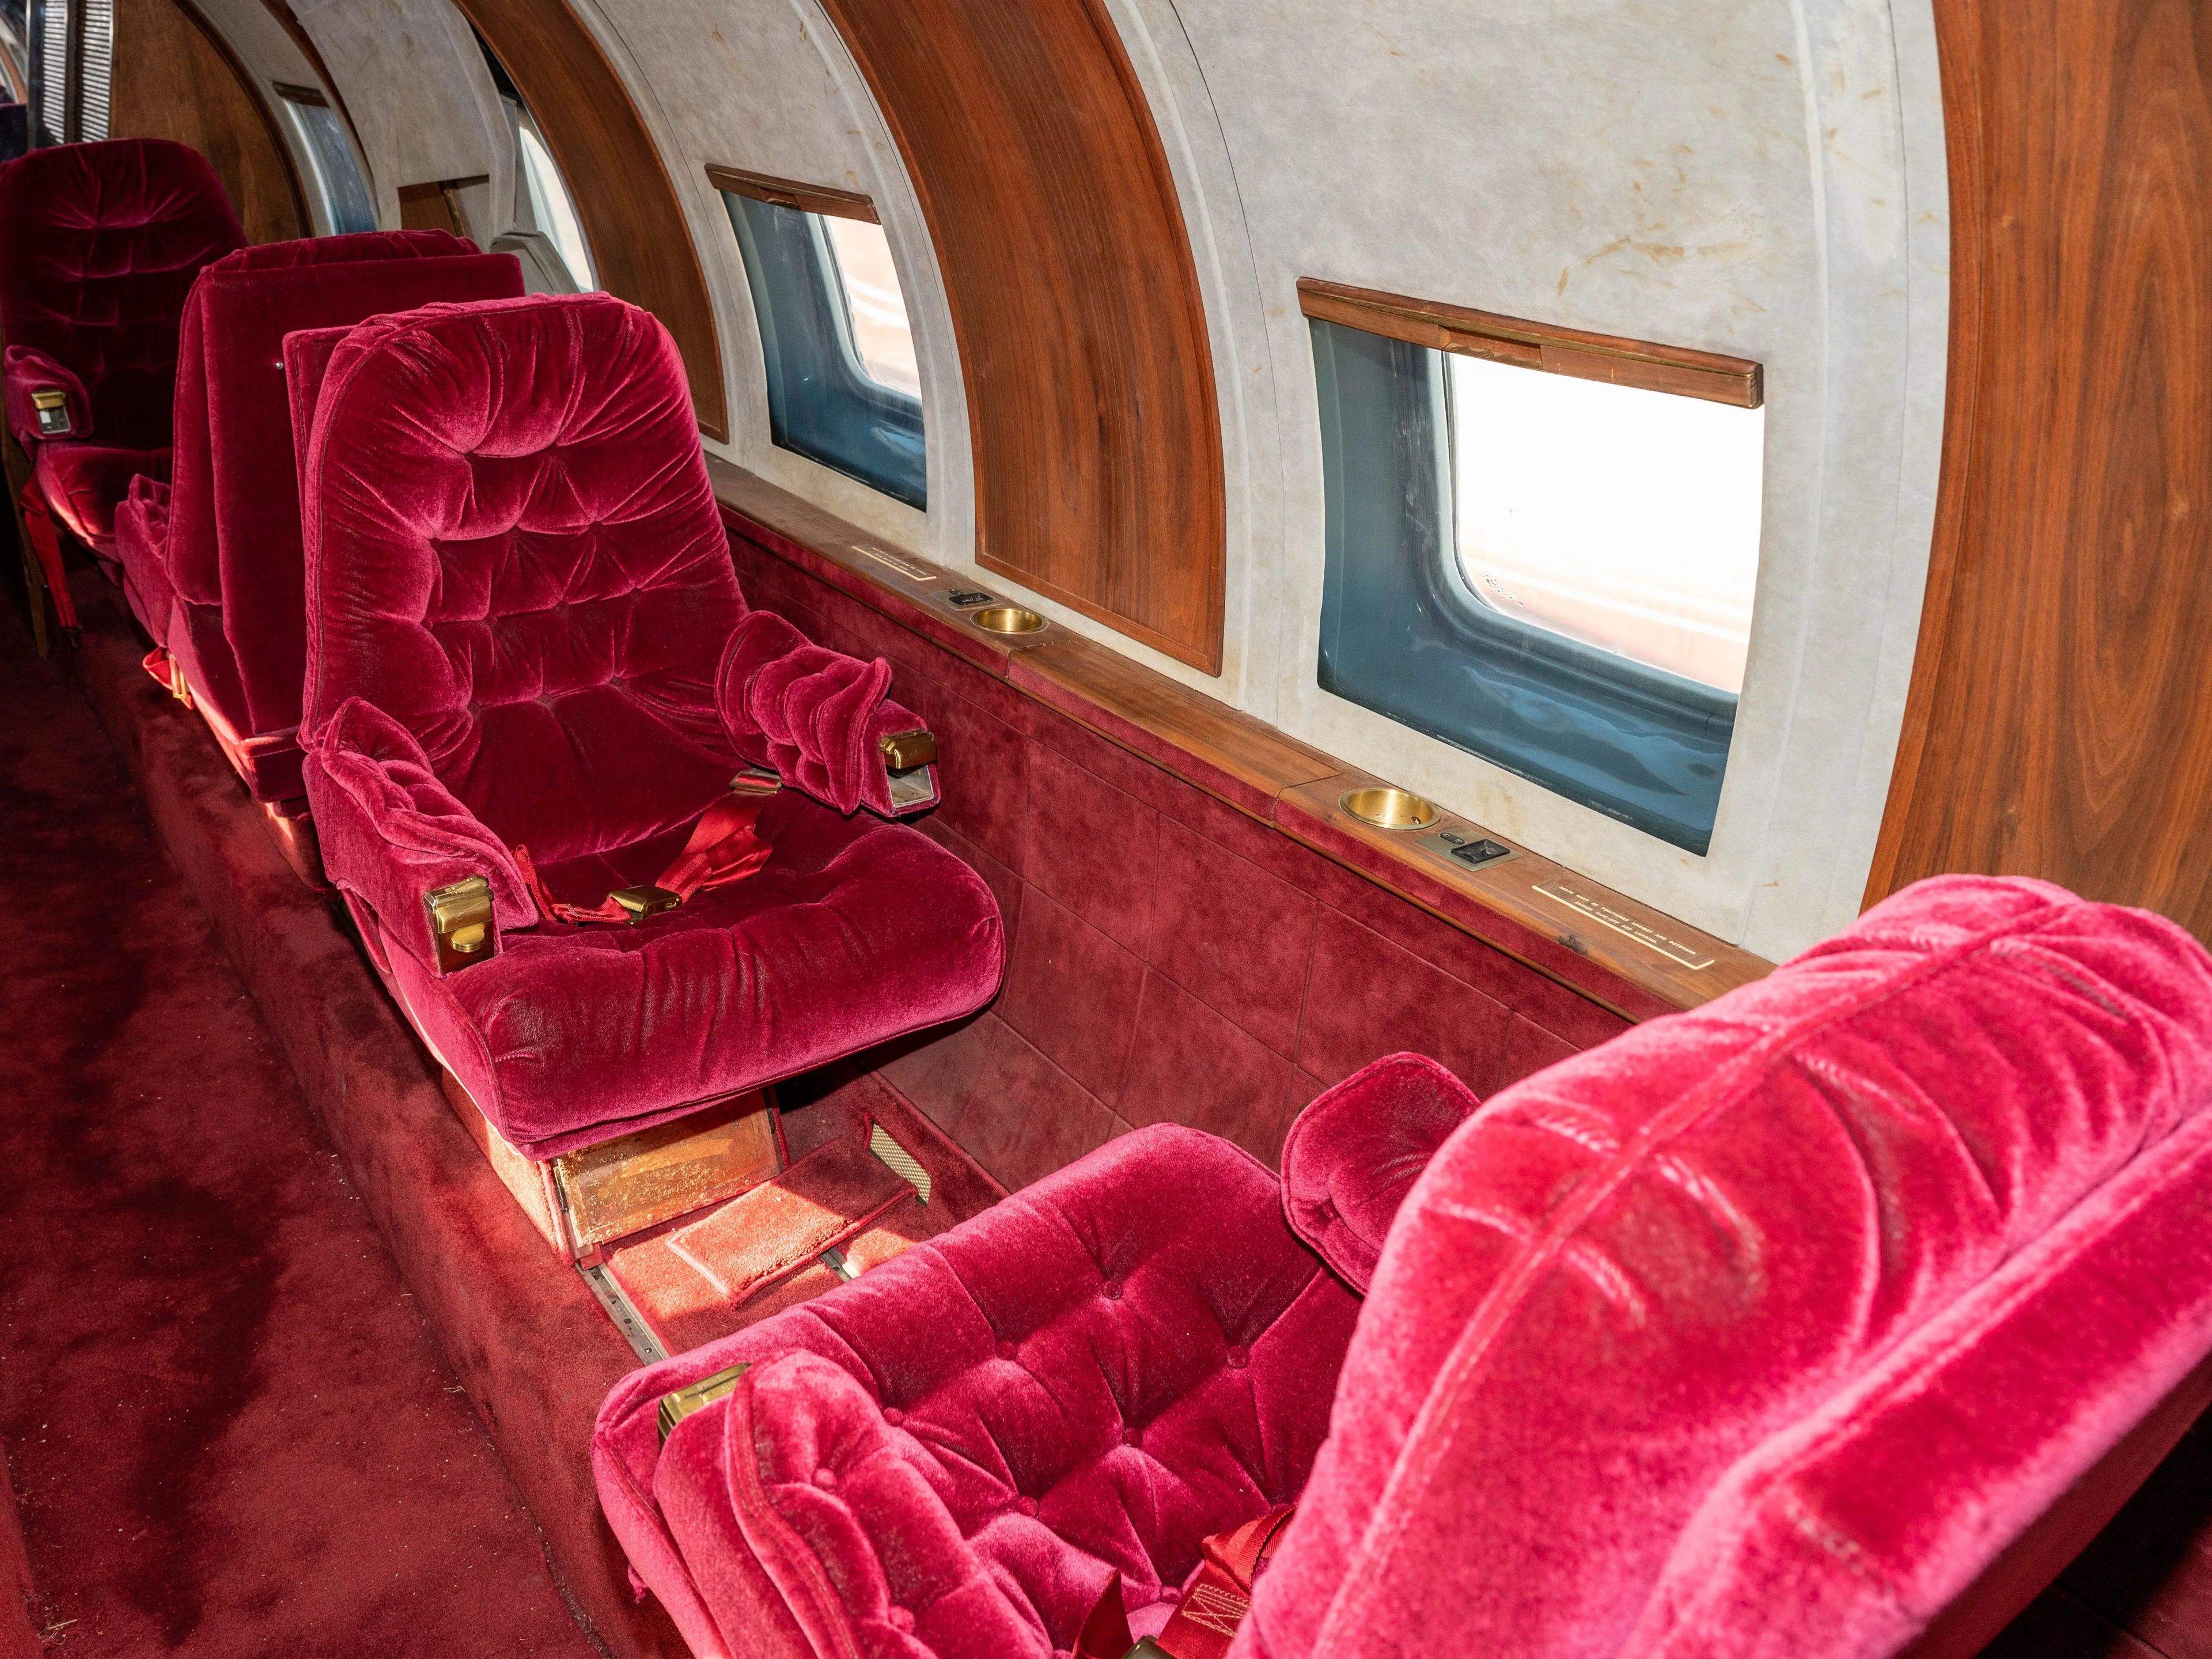 Photo of the red velvet seats inside which swivel and recline